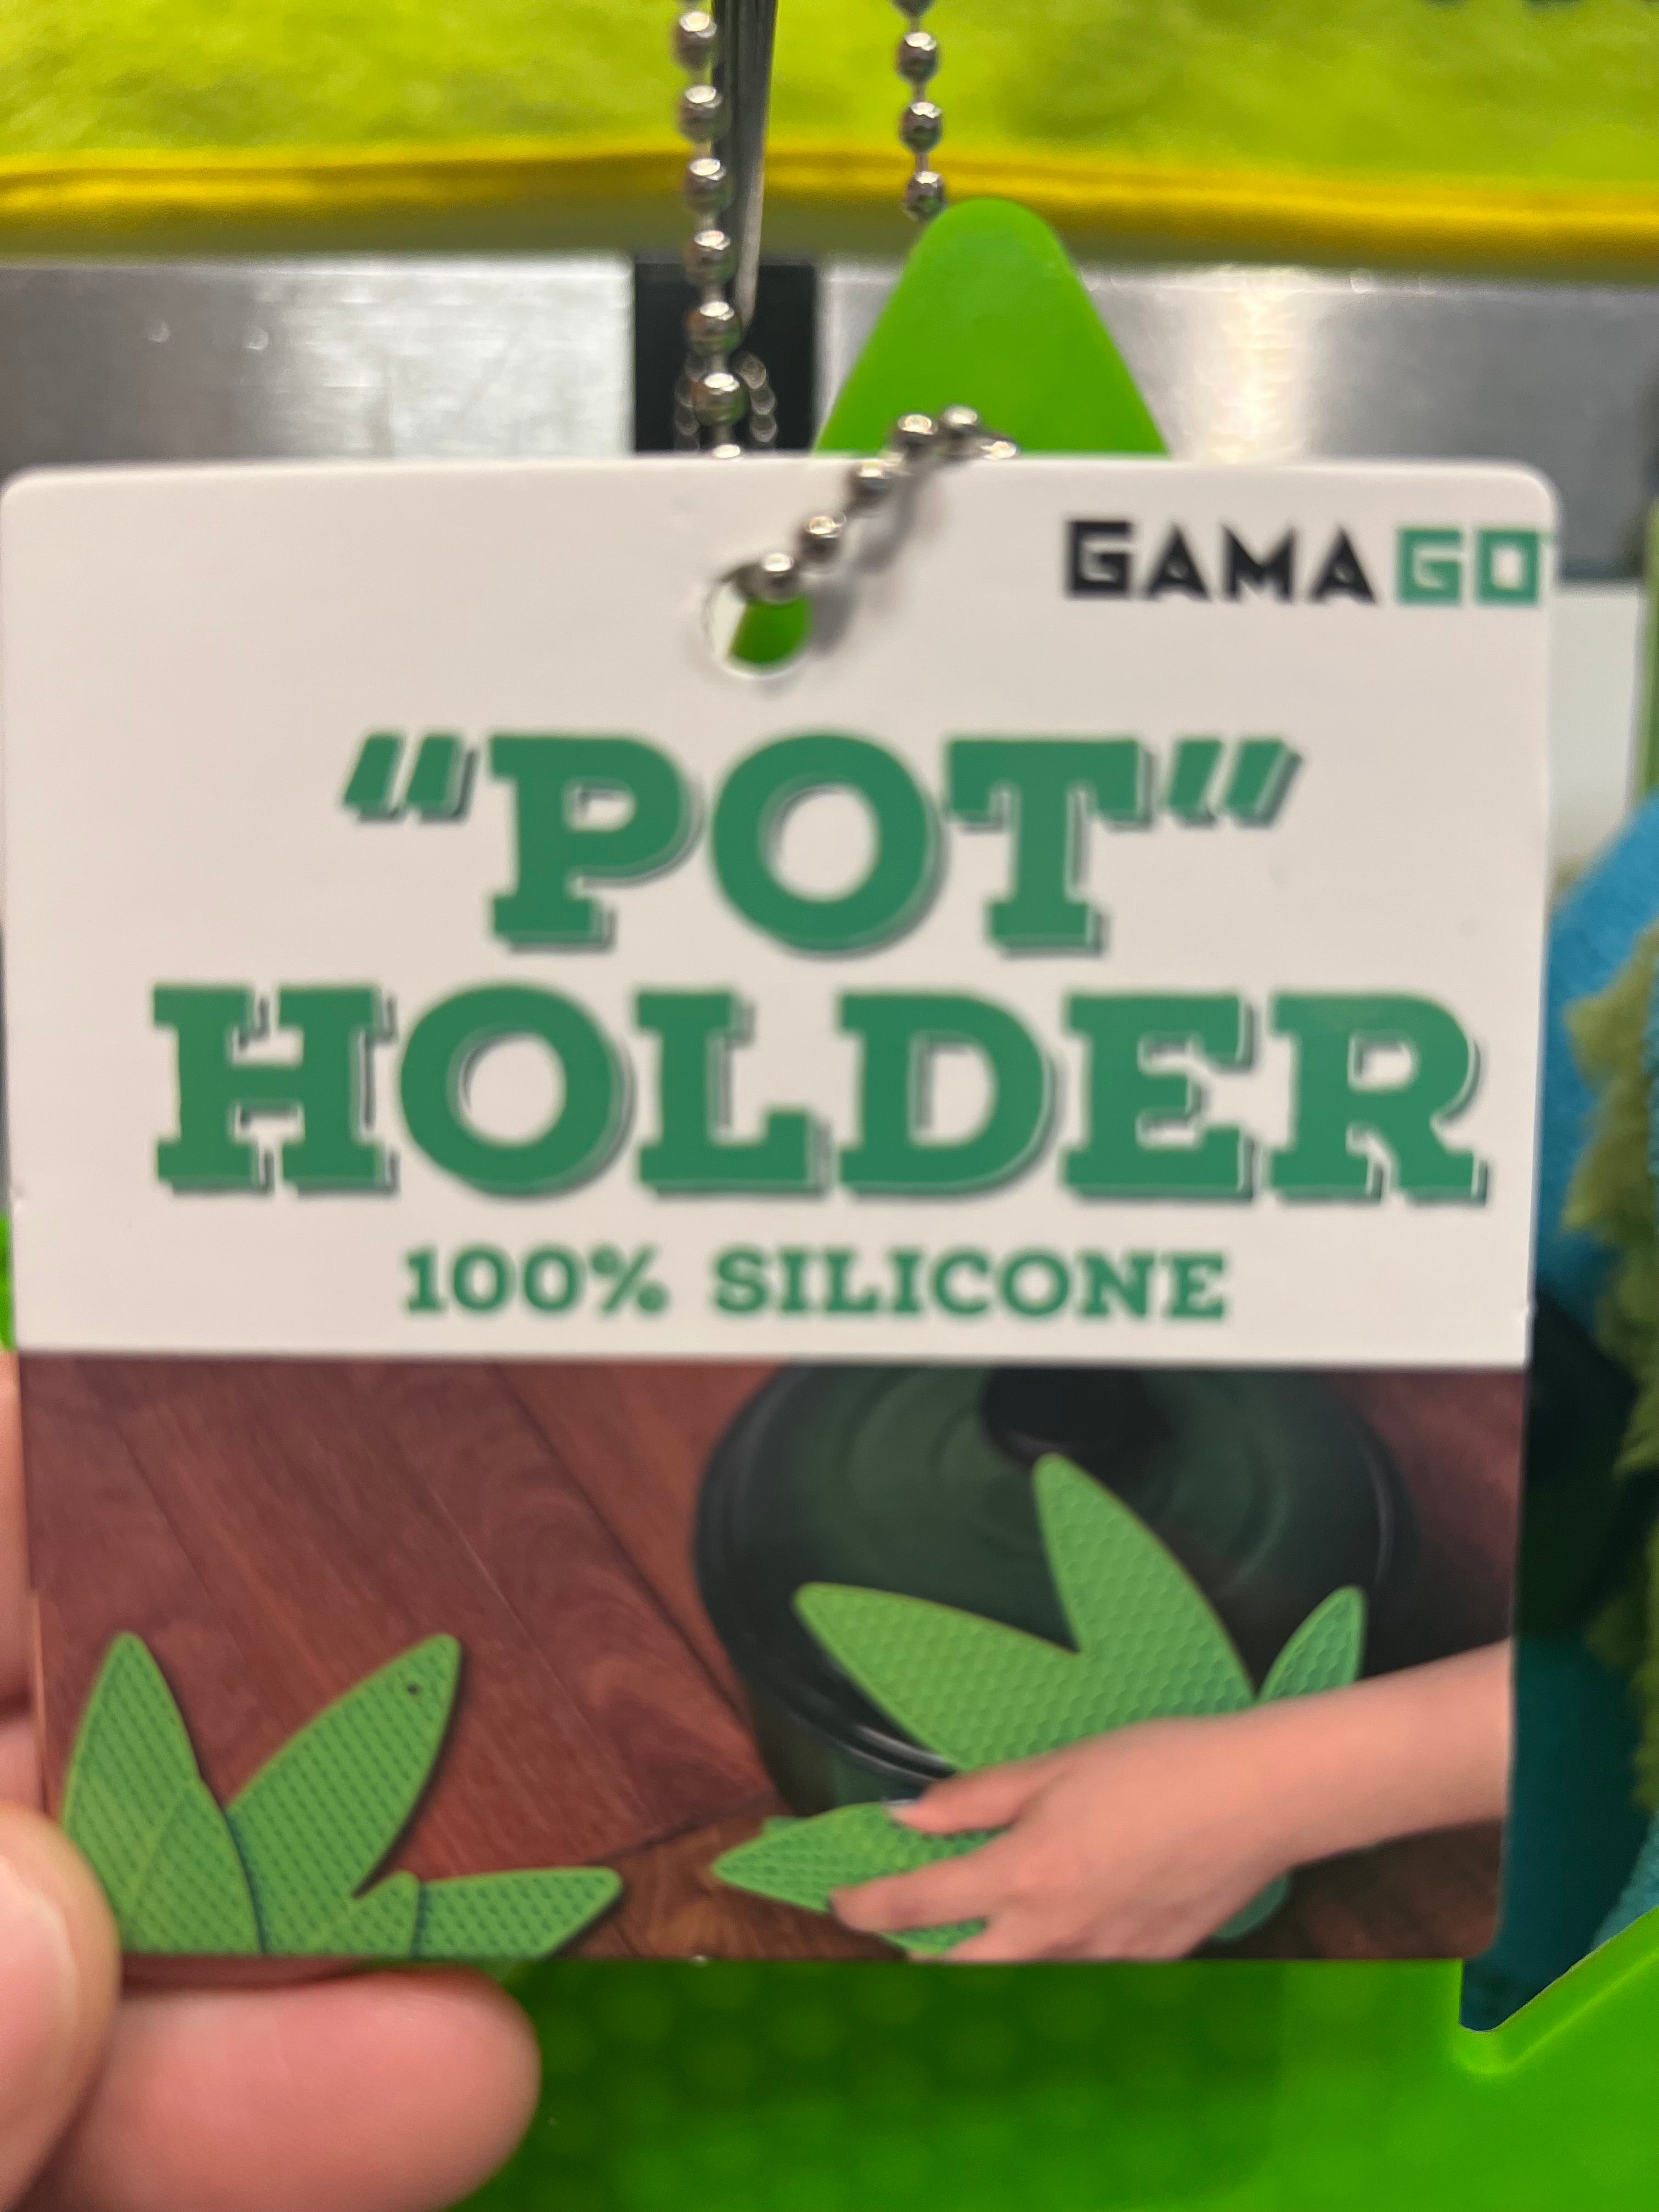 “pot” Holder - 100% Silicone By Gamago-hotRAGS.com